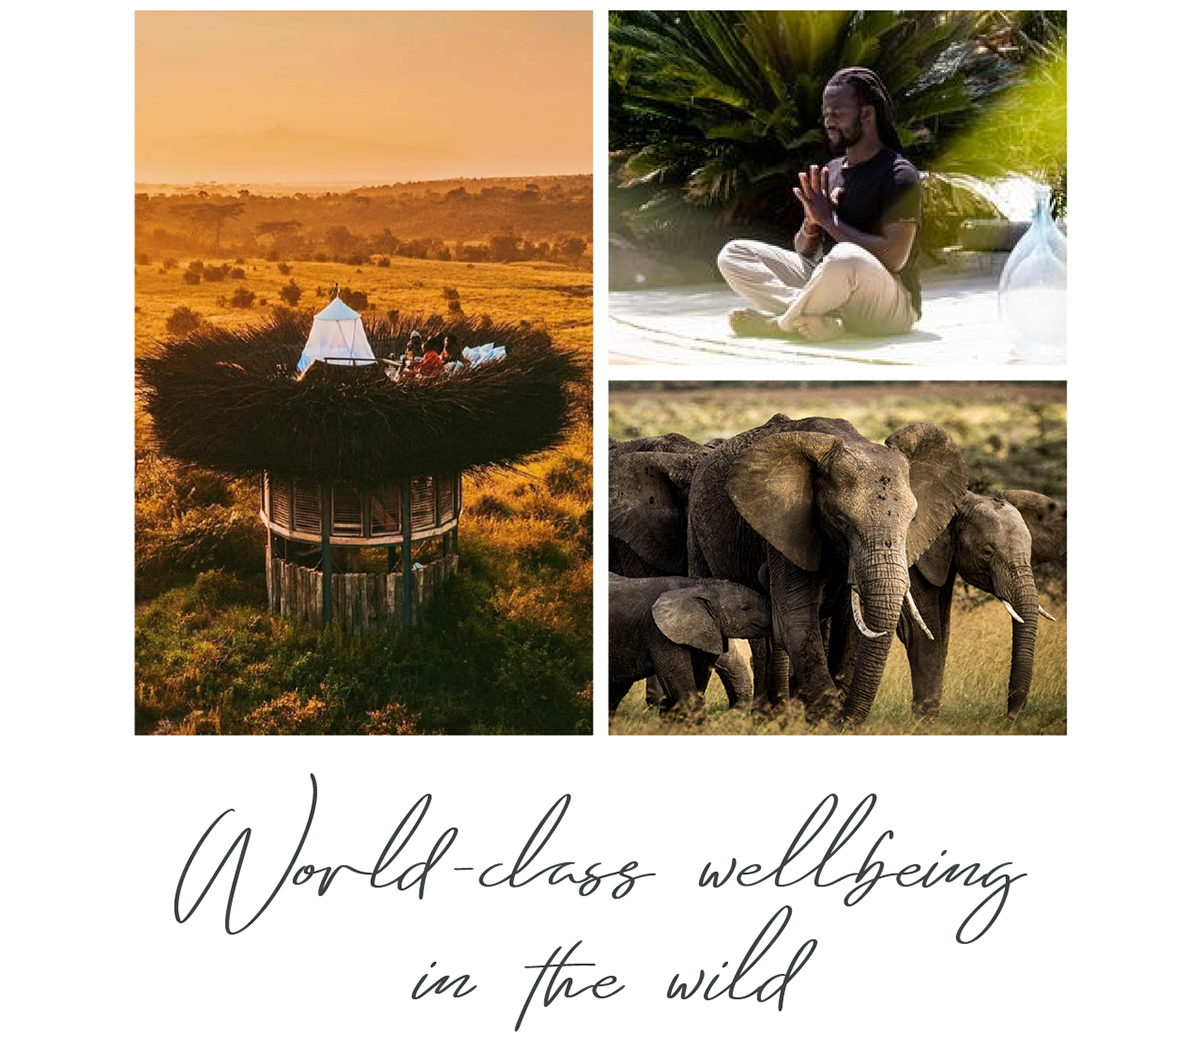 World-class wellbeing in the wild